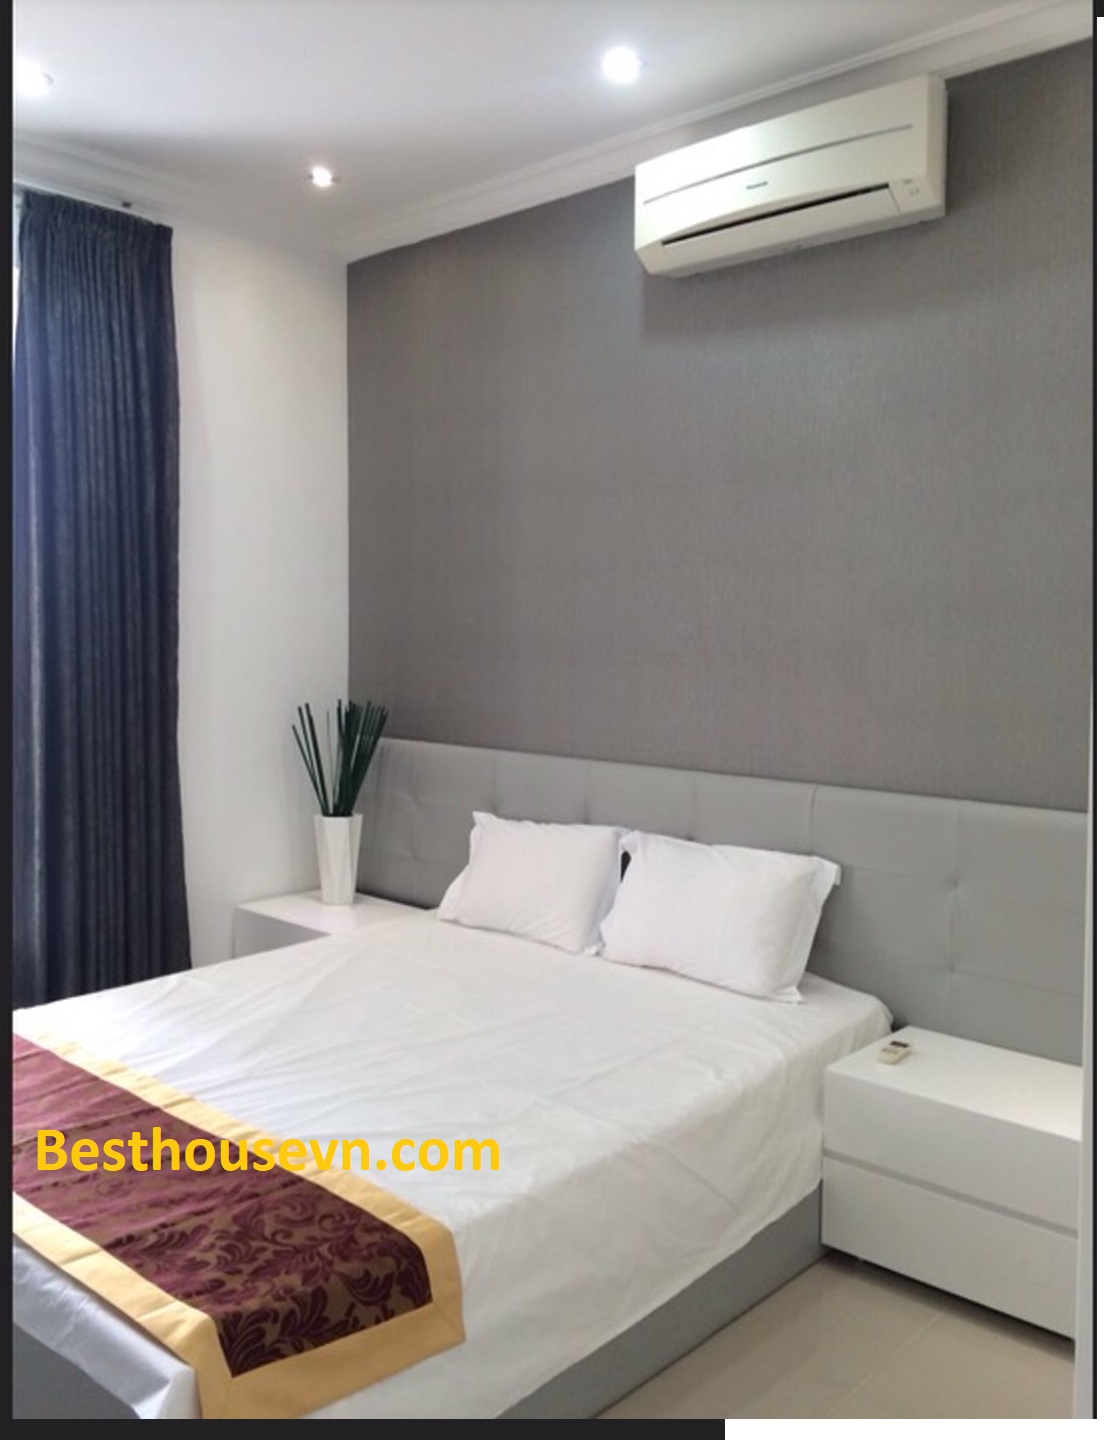 river-park-residence-apartment-for-rent-in-phu-my-hung-d-7-hcmc